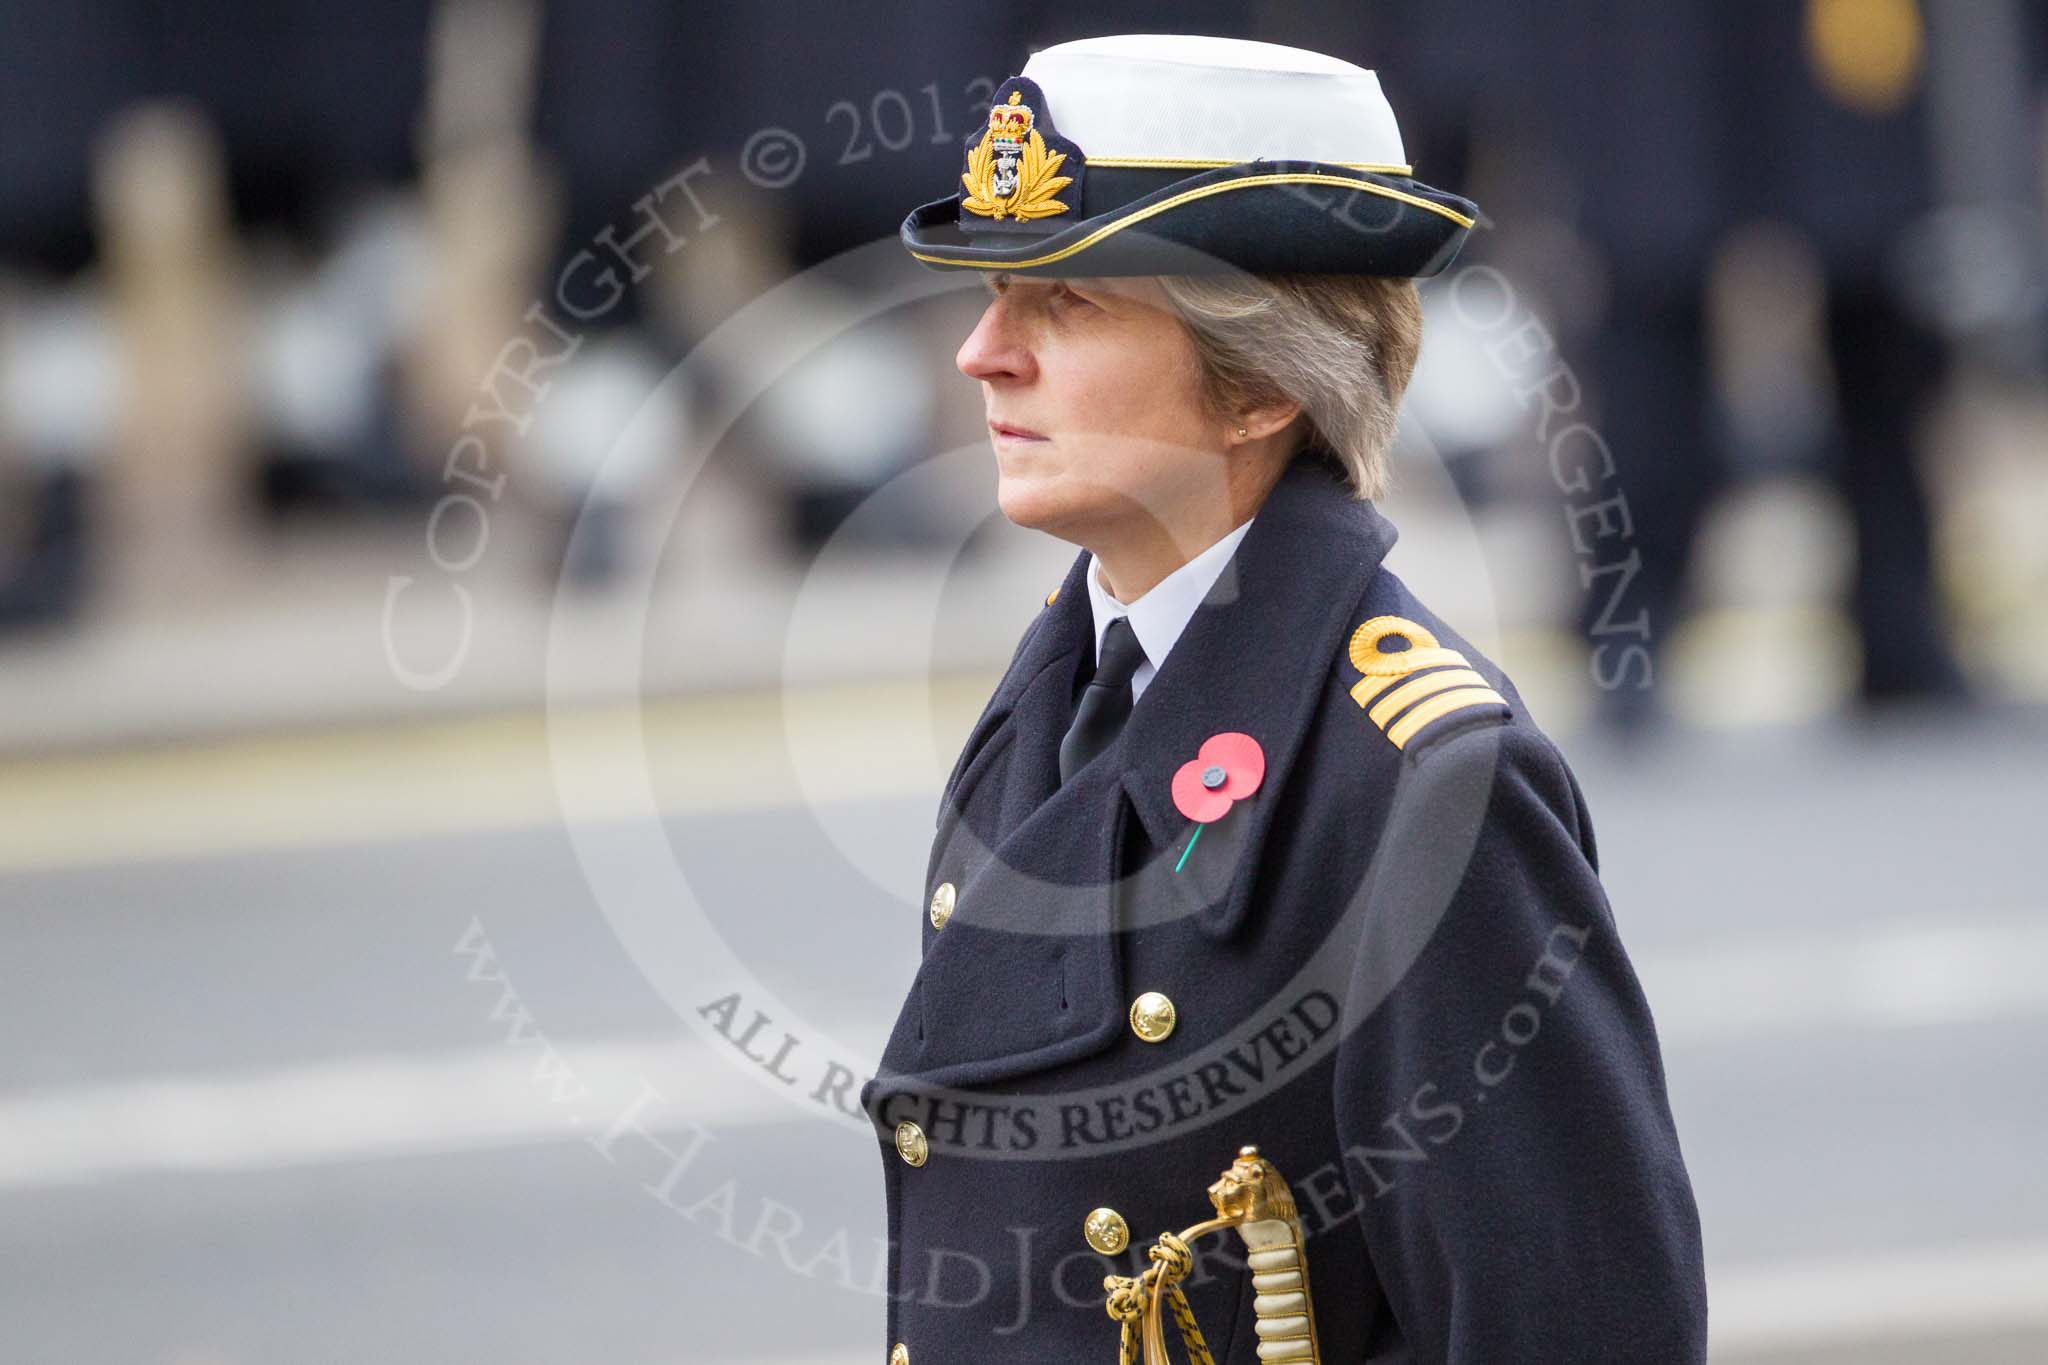 Remembrance Sunday at the Cenotaph 2015: Commander Anne Sullivan, RN, the Equerry to HRH The Princess Royal. Image #277, 08 November 2015 11:14 Whitehall, London, UK